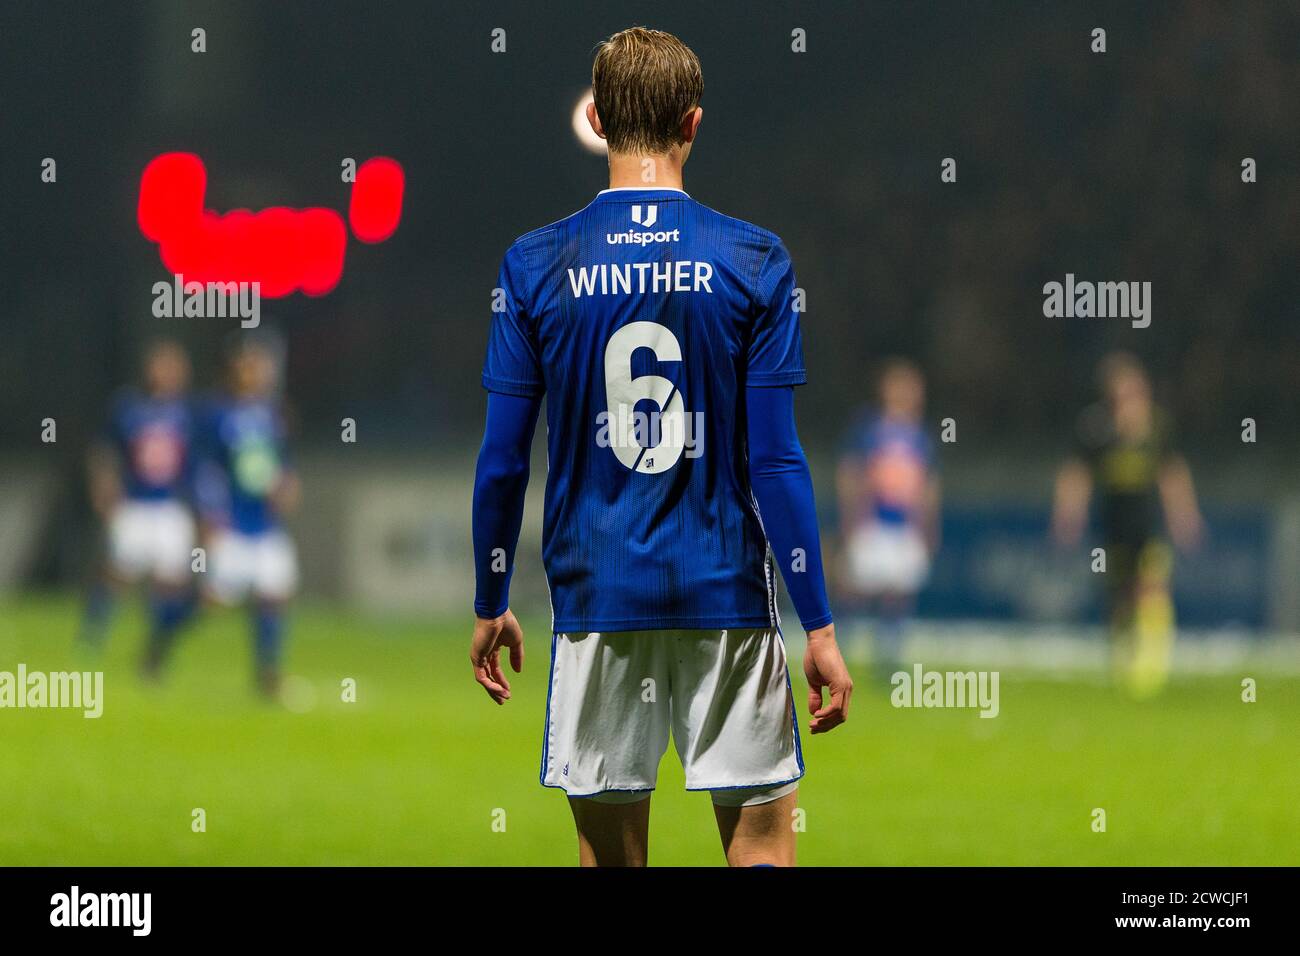 Lyngby, Denmark. 20th, October 2019. Frederik Winther (6) of Lyngby seen during the 3F Superliga match between Lyngby Boldklub and Broendby IF at Lyngby Stadium. (Photo credit: Gonzales Photo - Thomas Rasmussen). Stock Photo